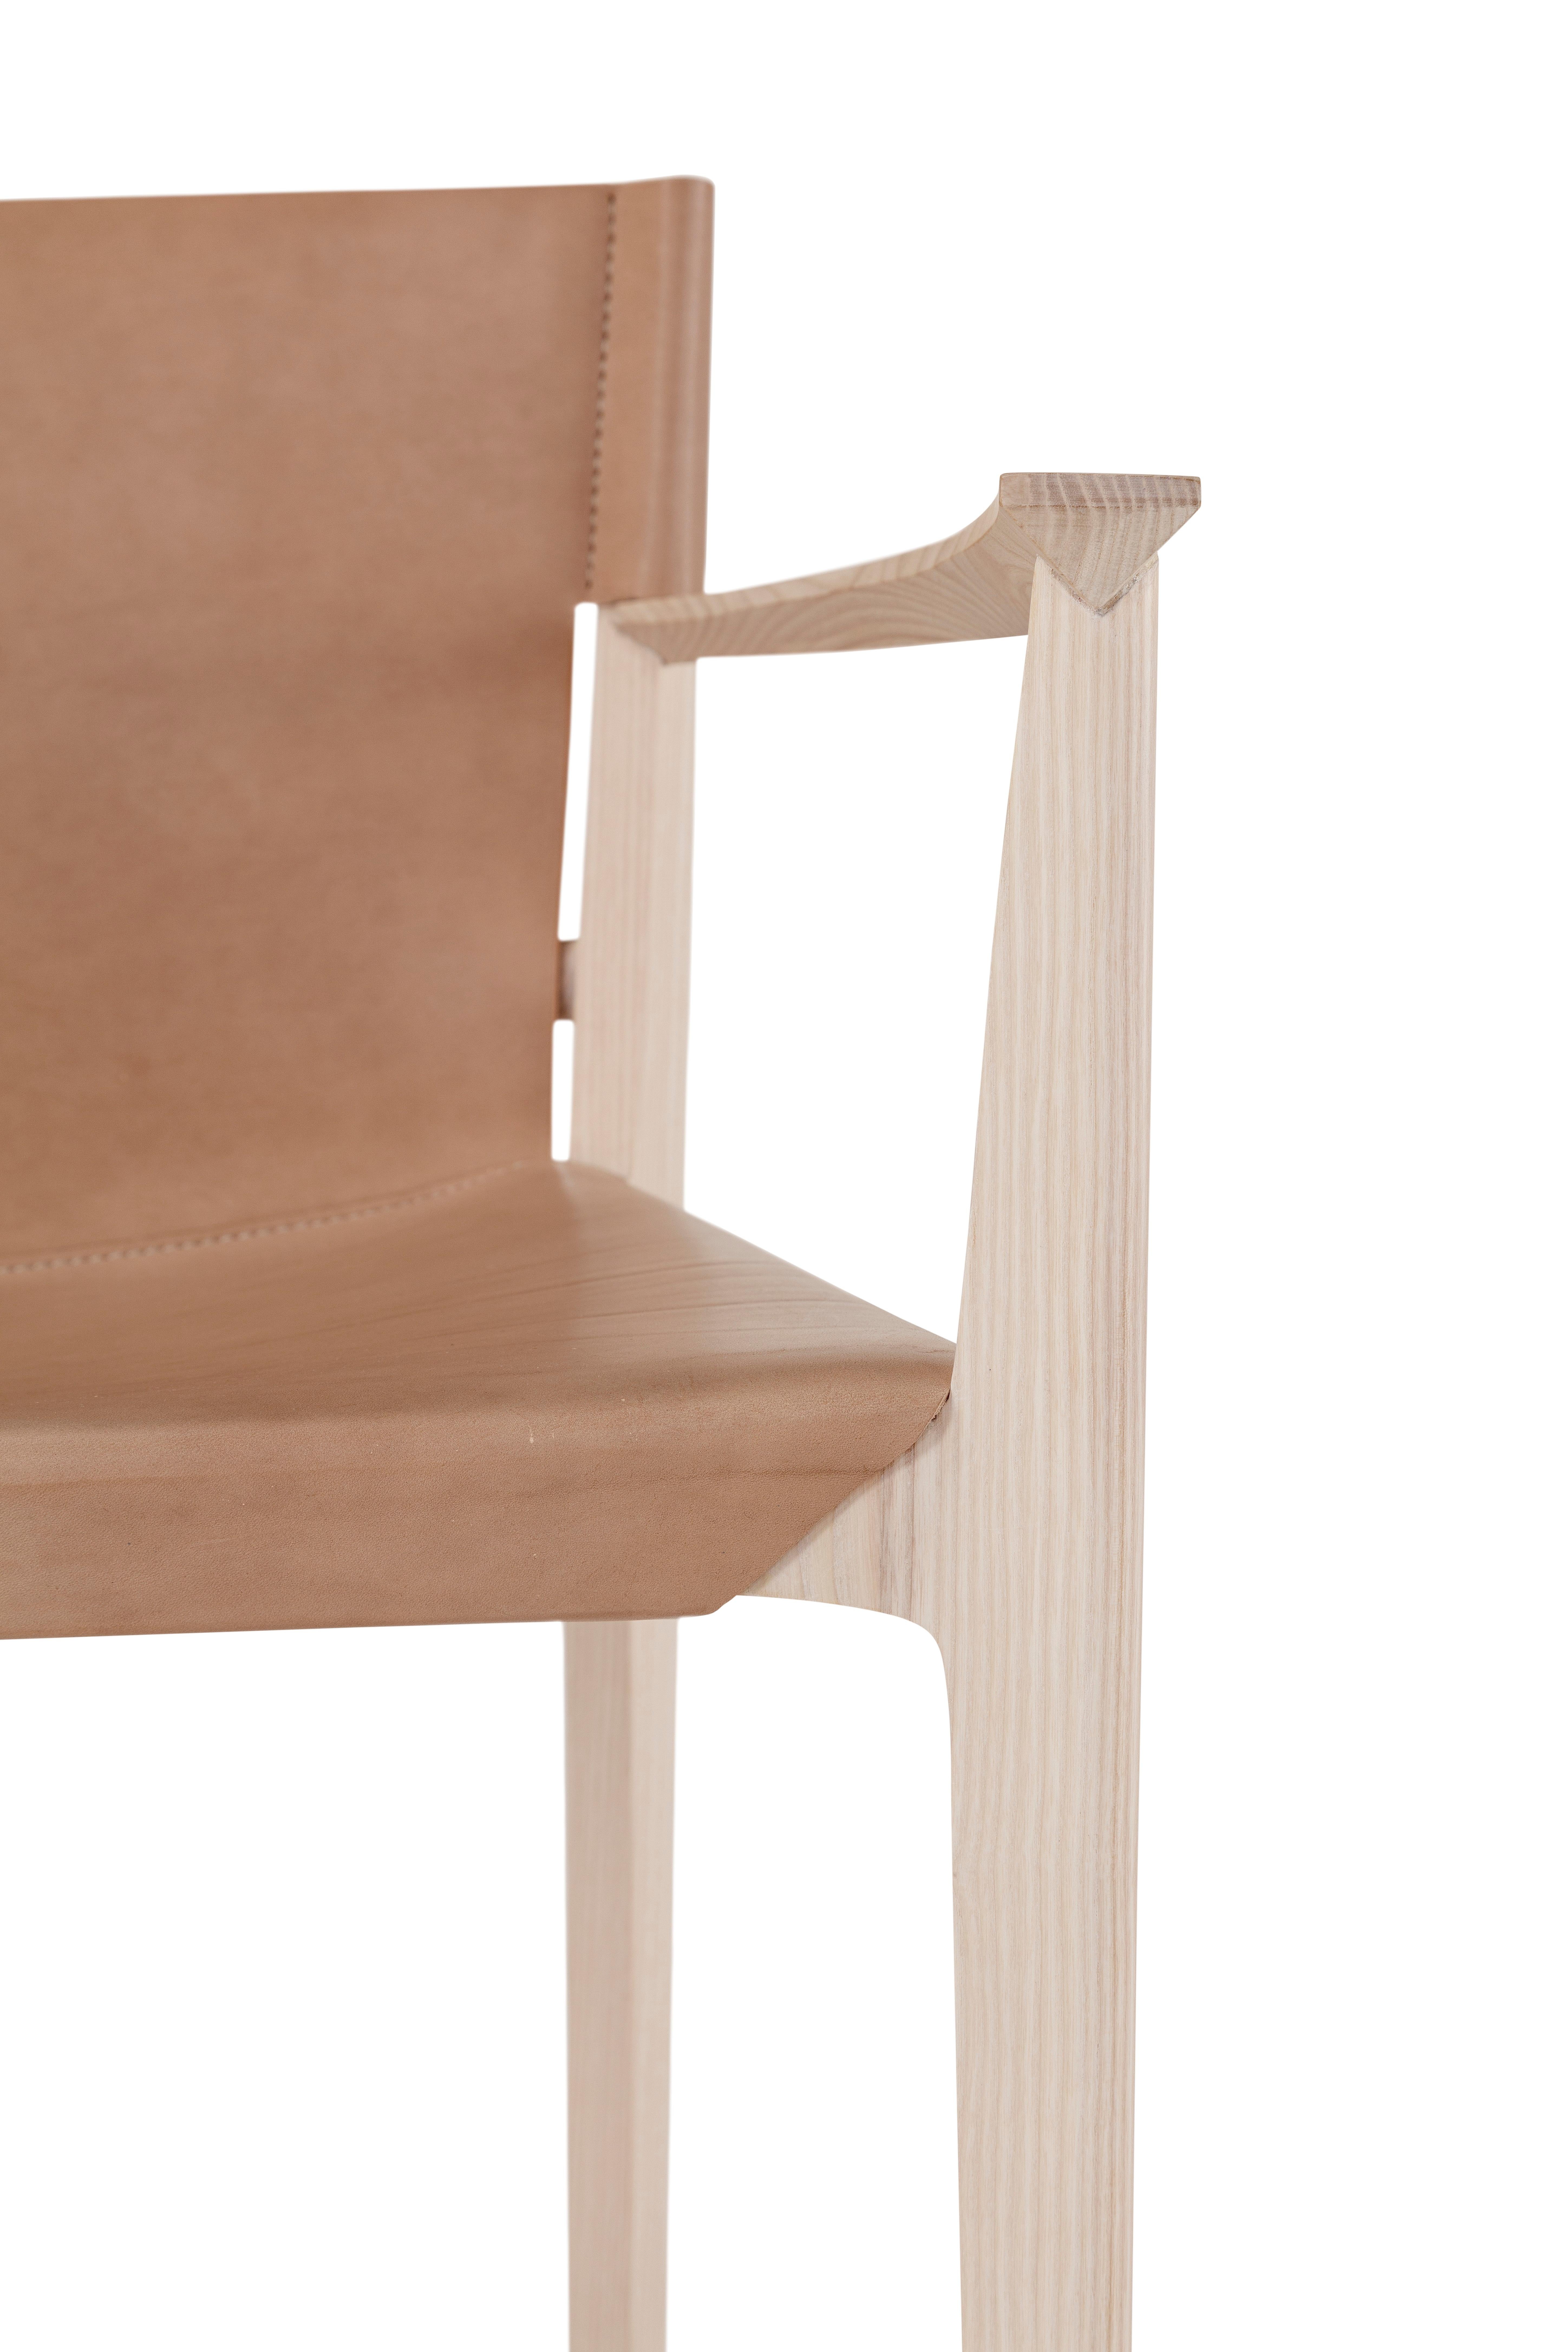 Leather Contemporary Wooden Chair 'Stilt', Cuoio For Sale